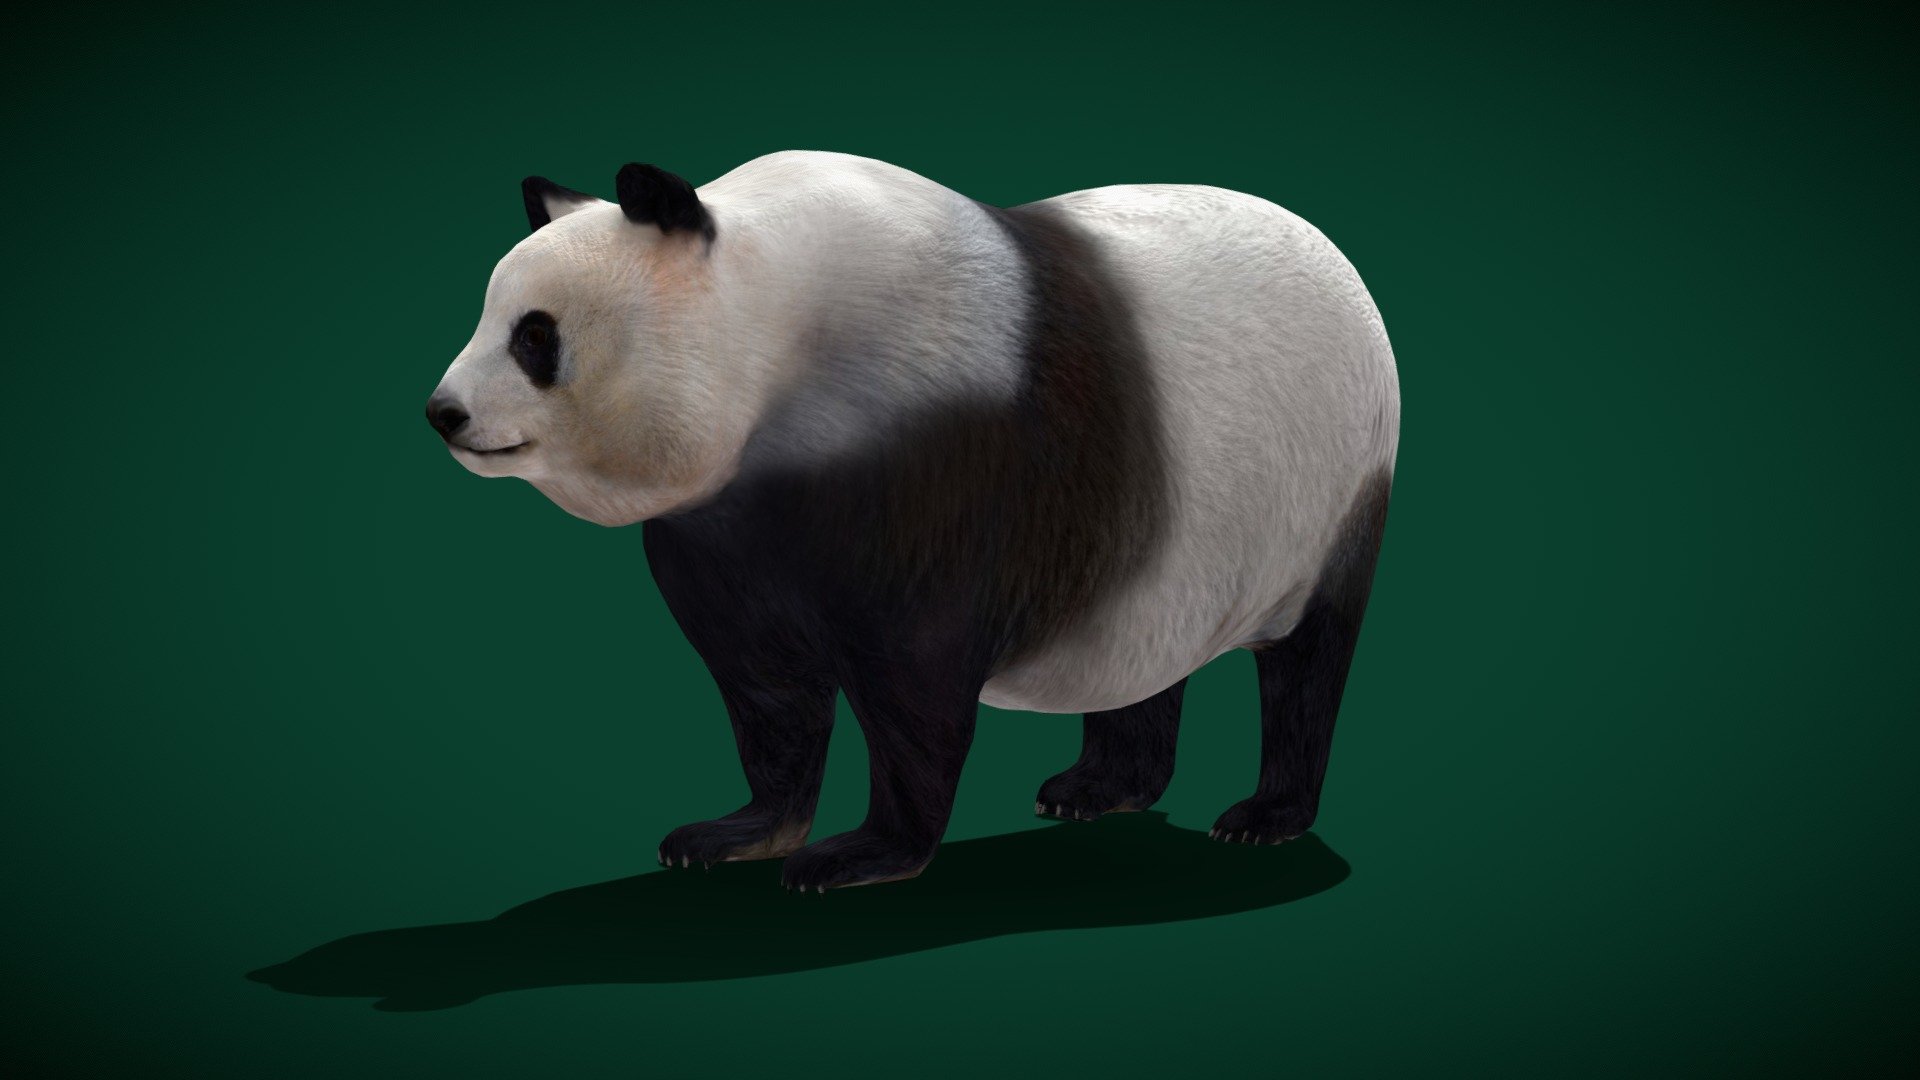 Giant Panda Bear (Terrestrial animal) Endangered,Panda Bear

Ailuropoda-melanoleuca Animal Mammal ( Qinling Mountain) Animalia

1 Draw Calls

-

Game Ready Asset

Subdivision Surface Ready

4 Animations

4K PBR Textures Materials

Unreal FBX (Unreal 4,5 Plus)

Unity FBX

Blend File 3.6.5 LTS

USDZ File (AR Ready). Real Scale Dimension (Xcode ,Reality Composer, Keynote Ready)

Textures Files

GLB File (Unreal 5.1 Plus Native Support)

Gltf File ( Spark AR, Lens Studio(SnapChat) , Effector(Tiktok) , Spline, Play Canvas,Omiverse ) Compatible

Triangles -25725

Faces     -15955

Edges     -29296

Vertices  -13350

Diffuse, Metallic, Roughness , Normal Map ,Specular Map,AO,

The giant panda, sometimes called a panda bear or simply panda, is a bear species endemic to China. It is characterised by its bold black-and-white coat and rotund body. The name &ldquo;giant panda